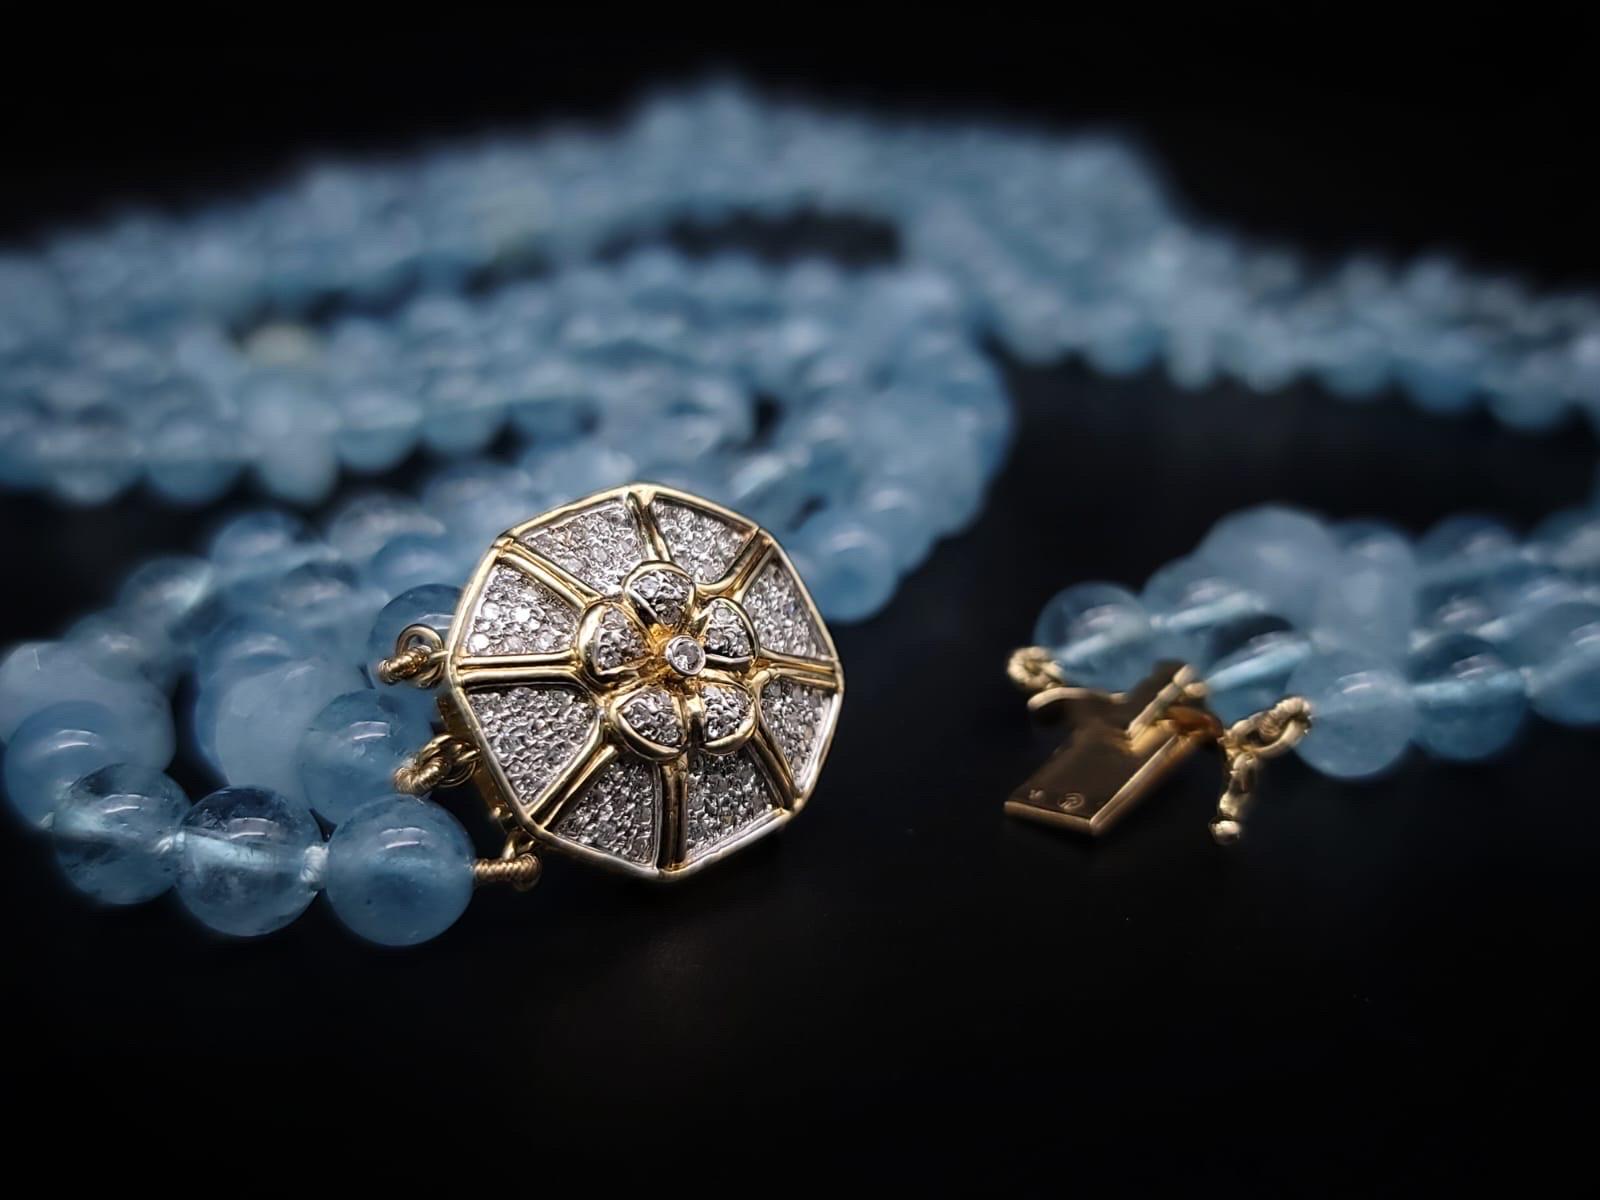 A.Jeschel AAA Aquamarine necklace with a 14k Gold Diamond clasp. 8